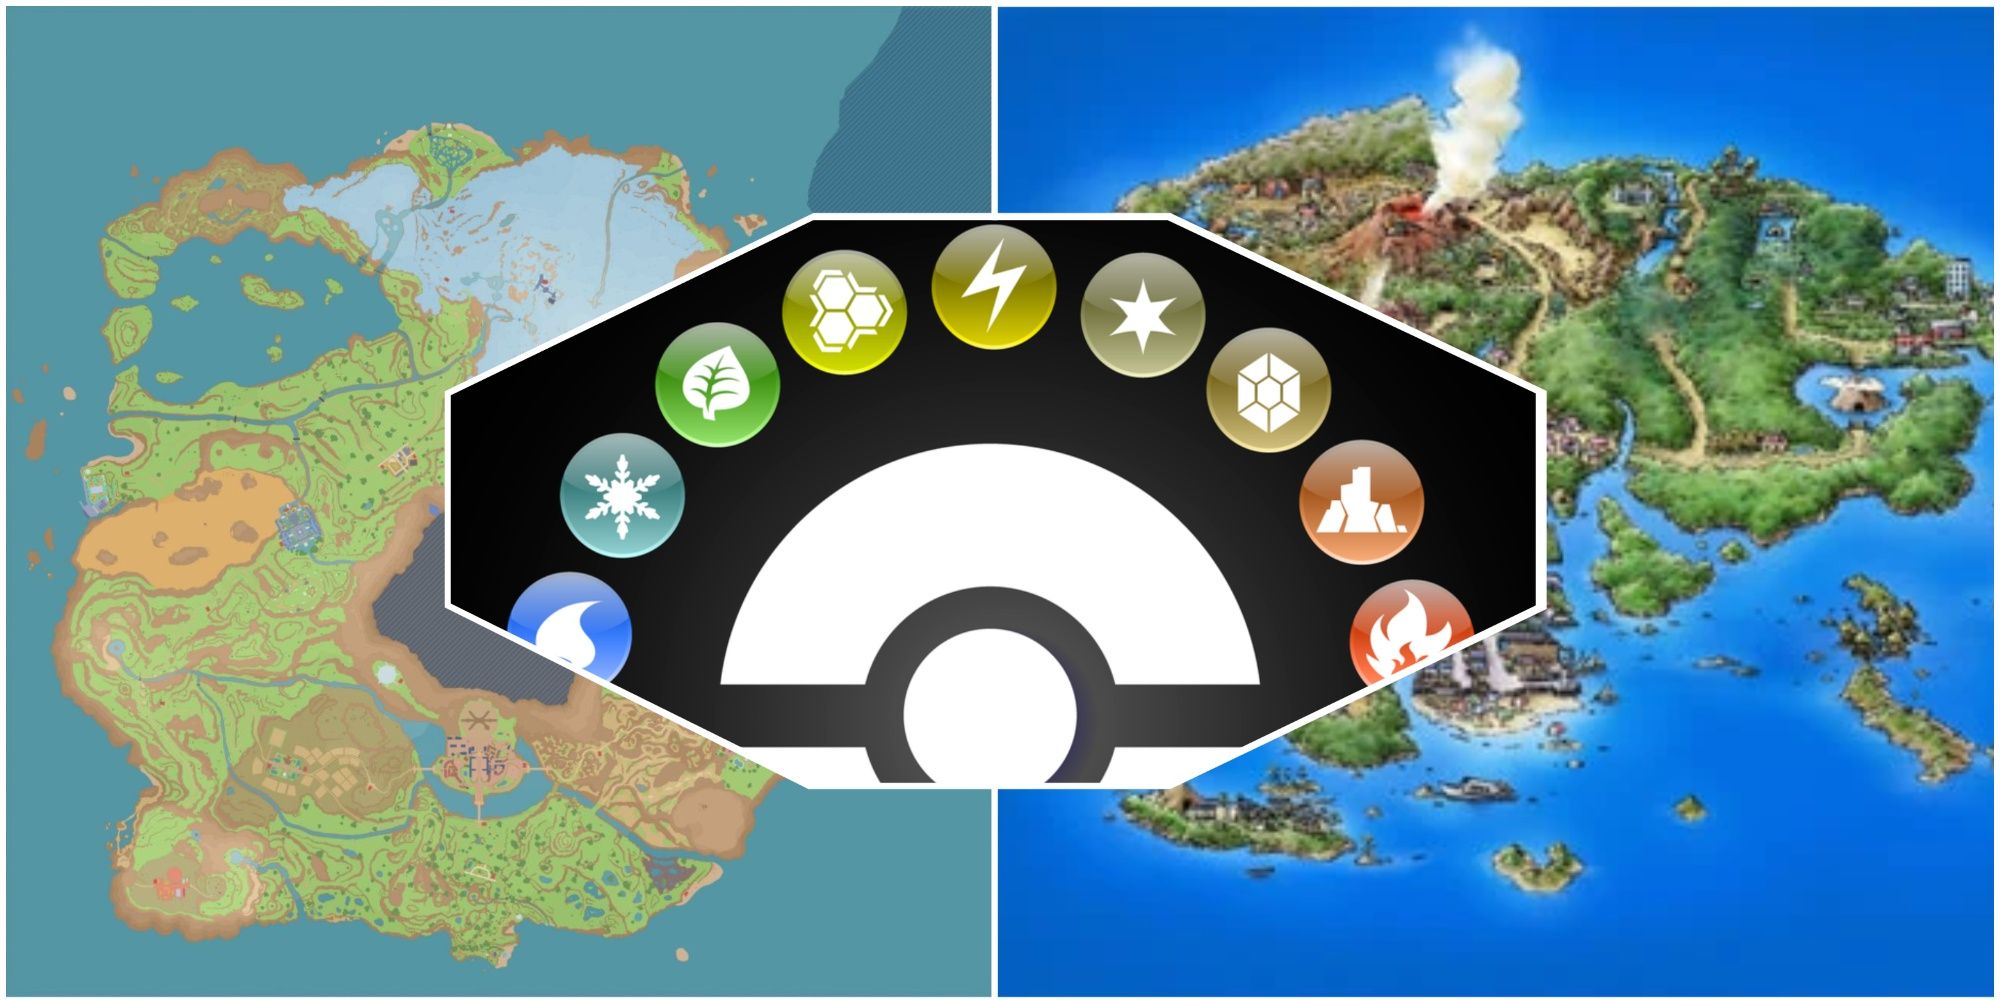 Maps of the regions Paldea and Hoenn with a Pokeball surrounded by Pokemon type symbols in the middle.